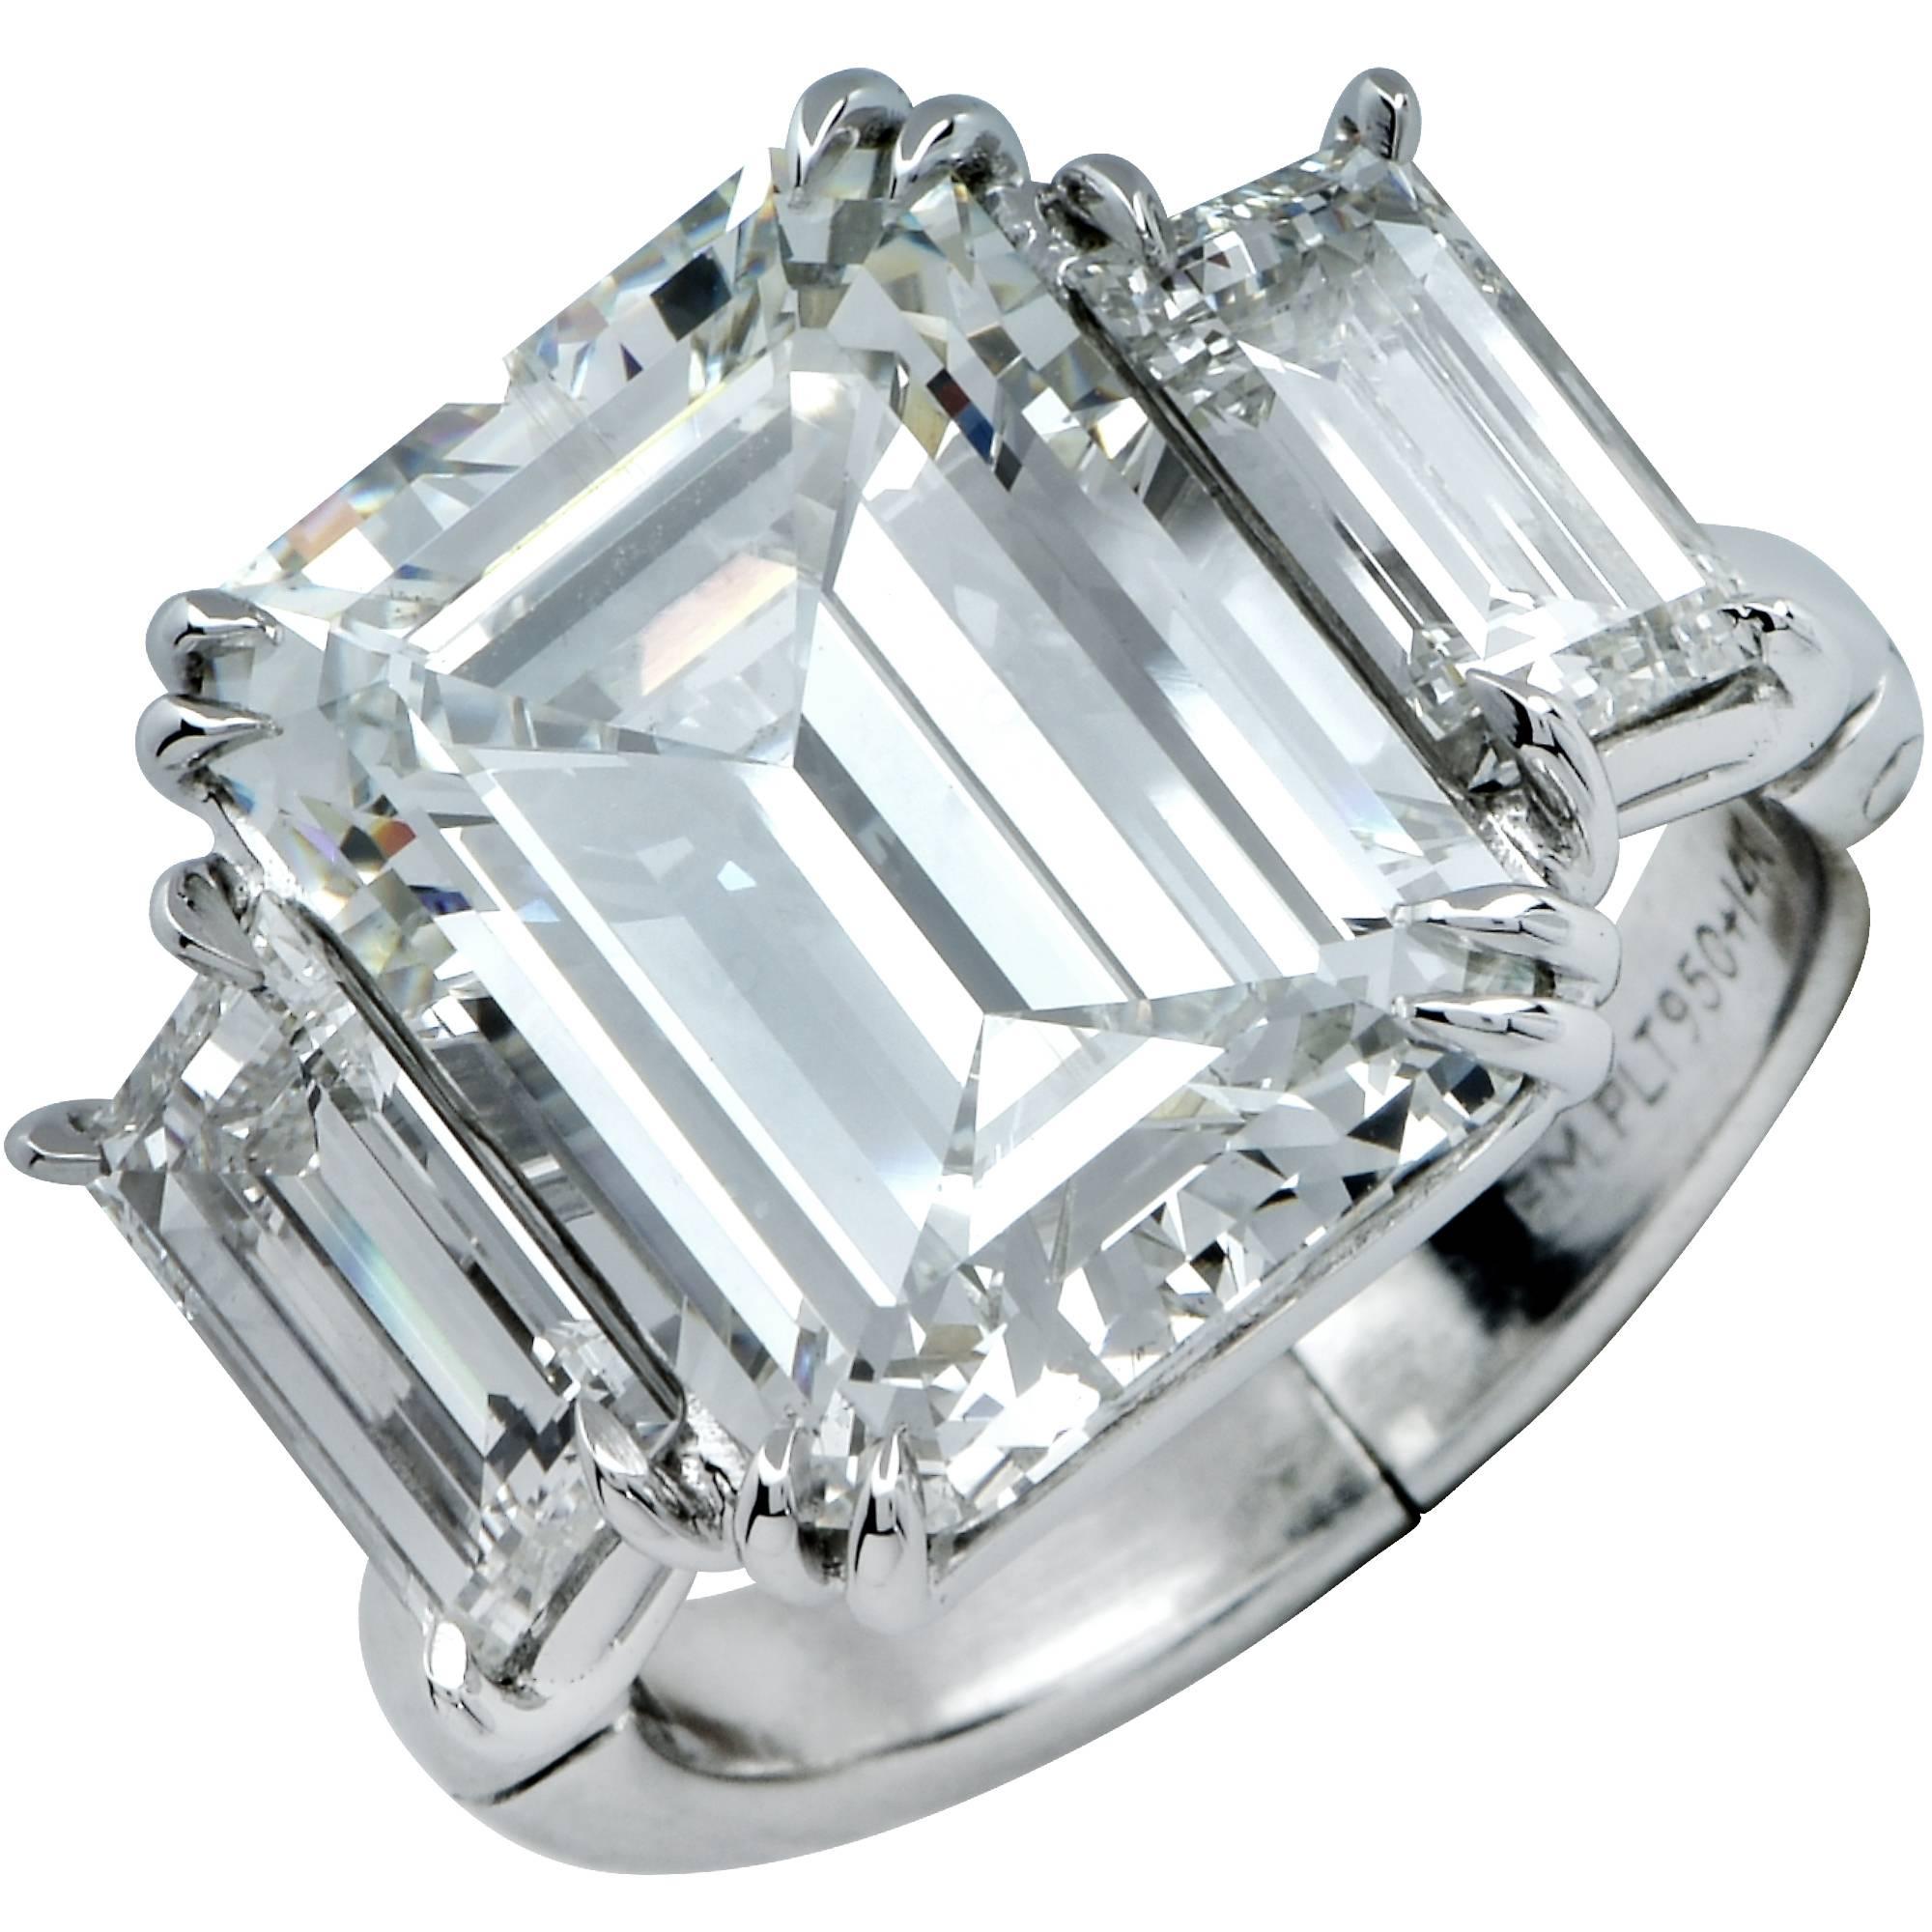 This stunning platinum handmade engagement ring boasts a spectacular GIA graded 7.98ct emerald cut diamond J color and SI2 clarity which is 100% eye clean. It is flanked by 2 long baguette cut diamonds weighing 2.08ct total I color and VS clarity.